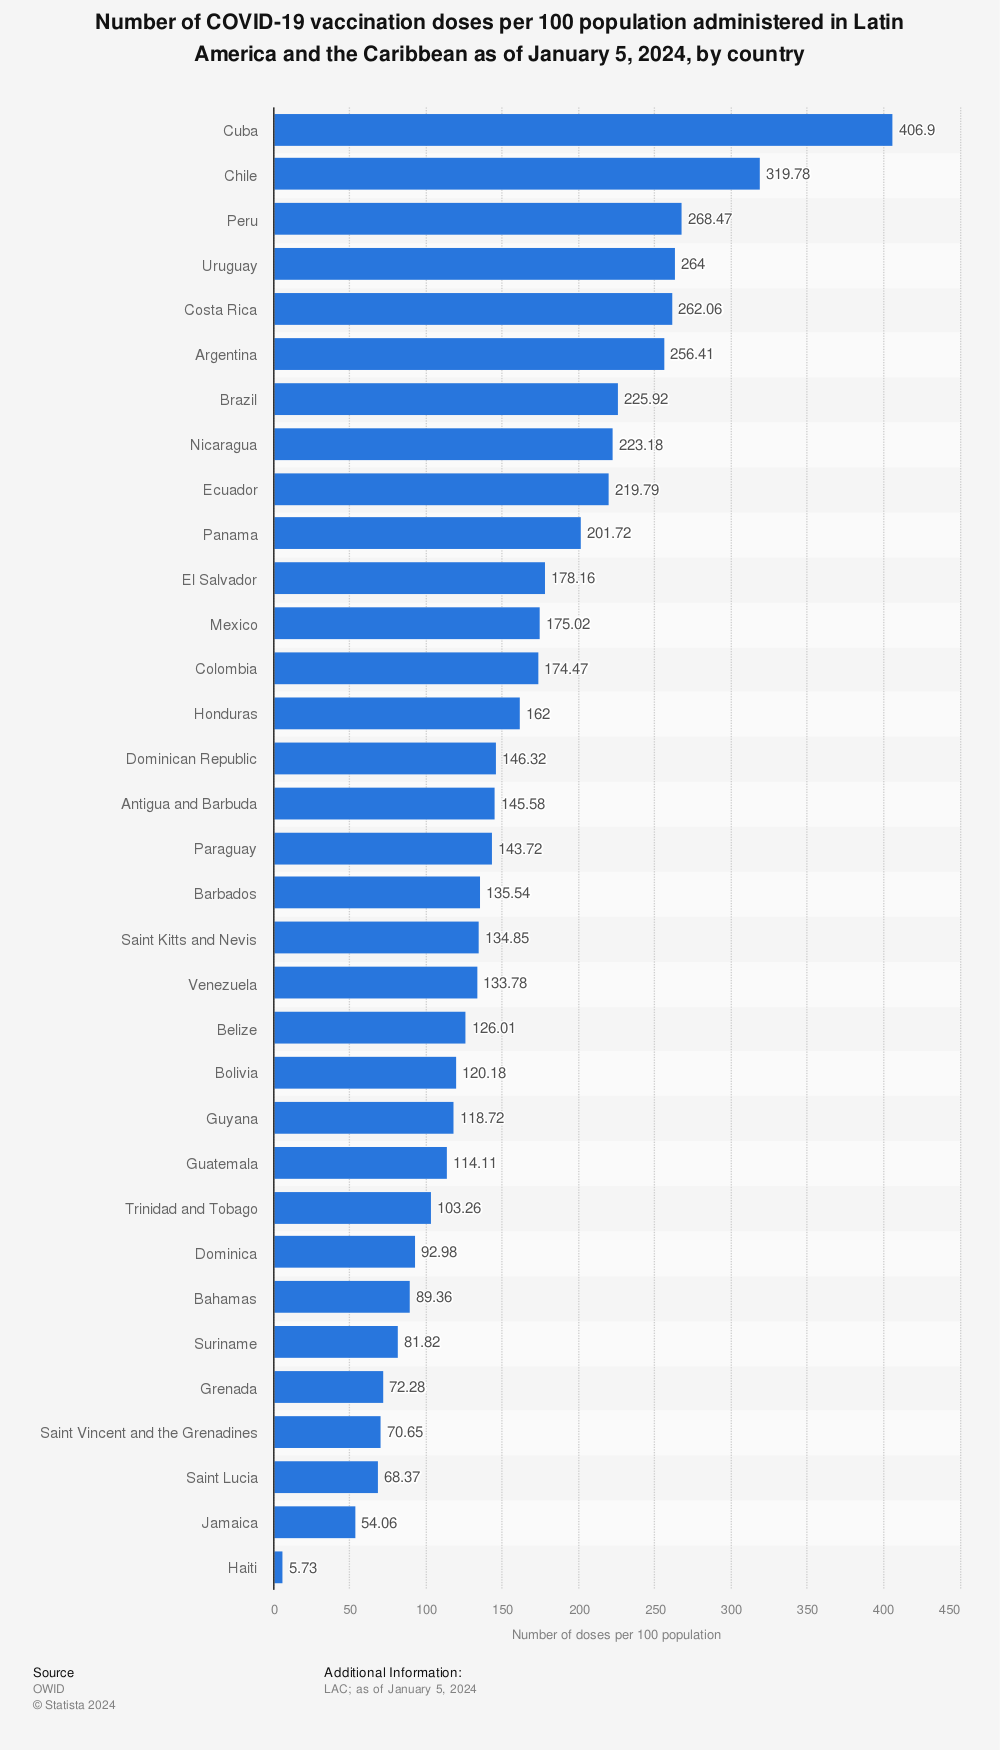 Statistic: Number of COVID-19 vaccination doses per 100 population administered in Latin America and the Caribbean as of January 5, 2024, by country | Statista